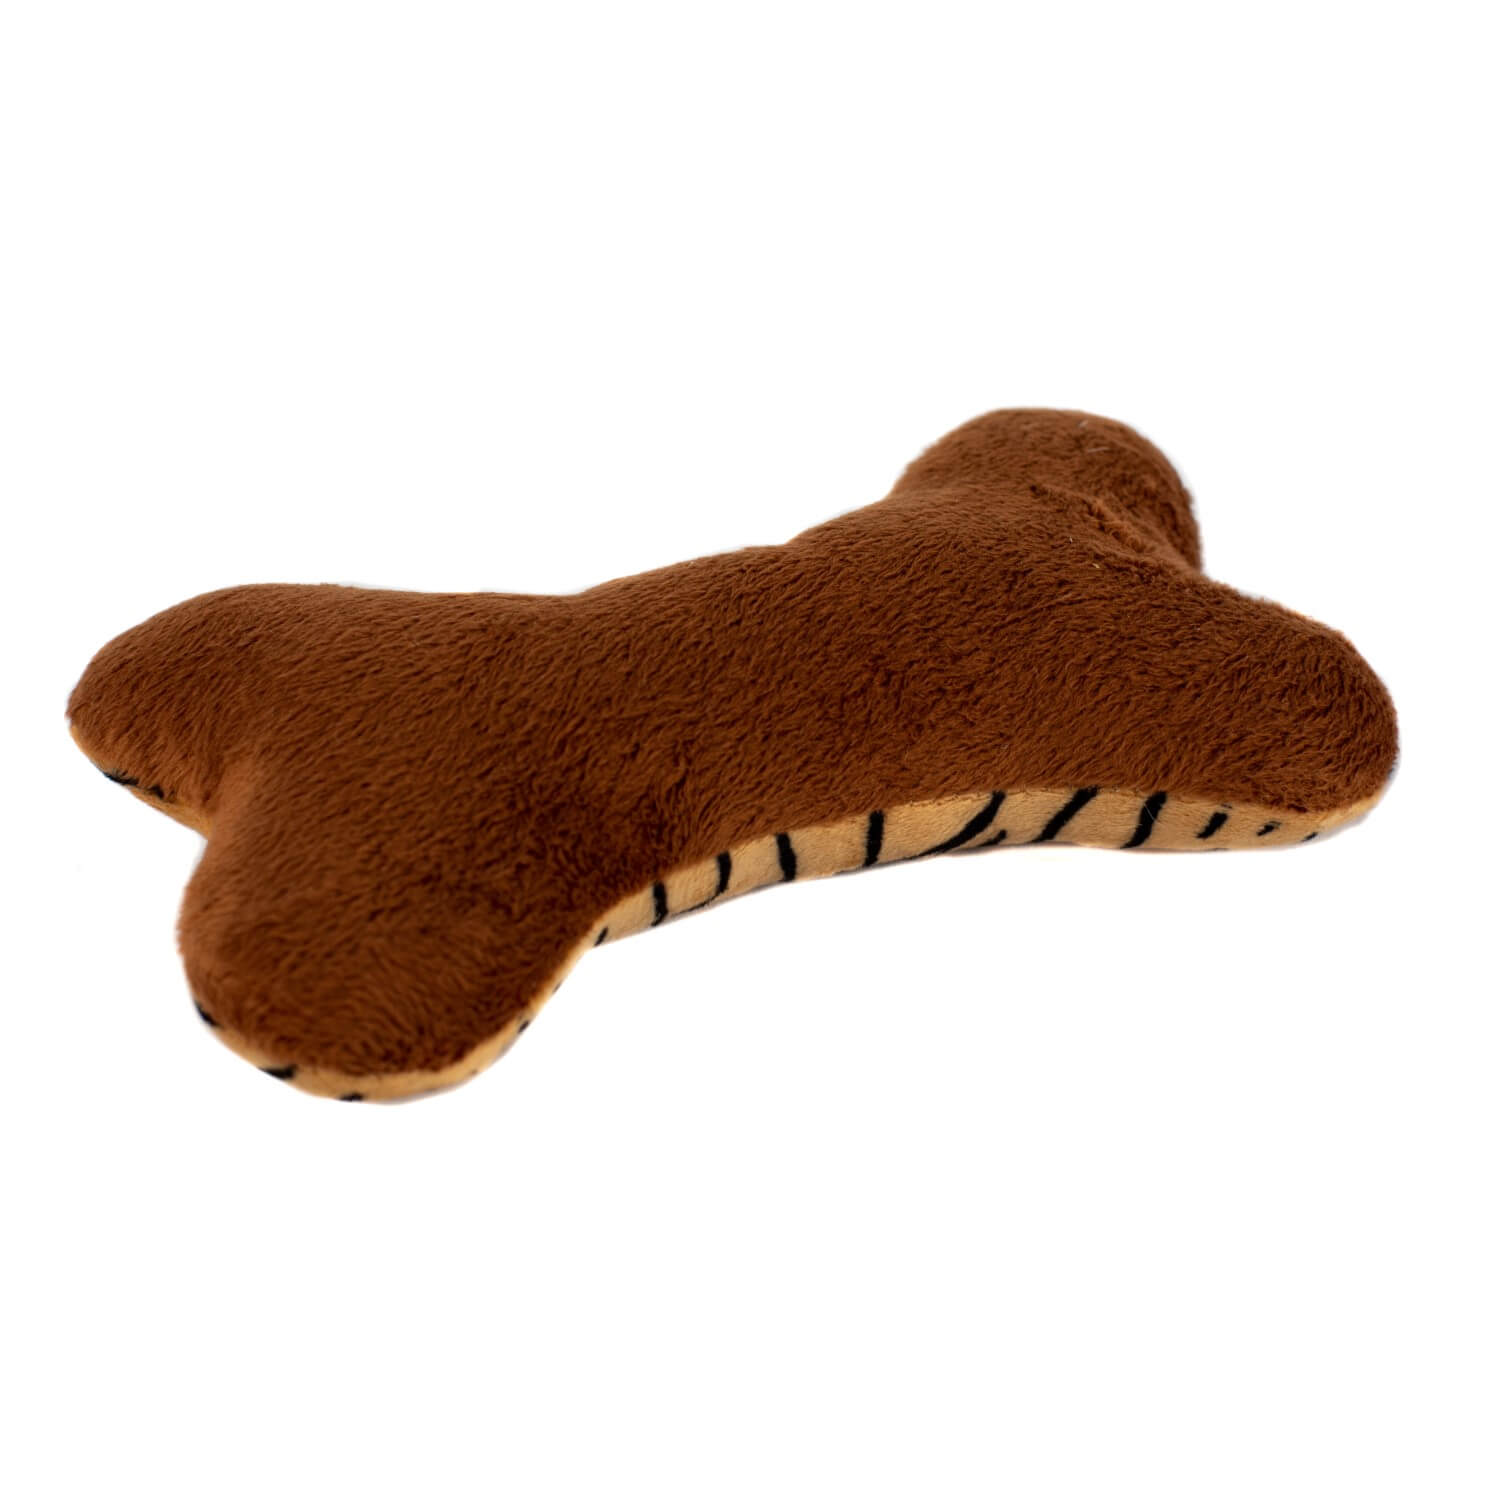 A Tiger Patterned Plush Dog Bone shaped stuffed toy with the brown side facing upwards.